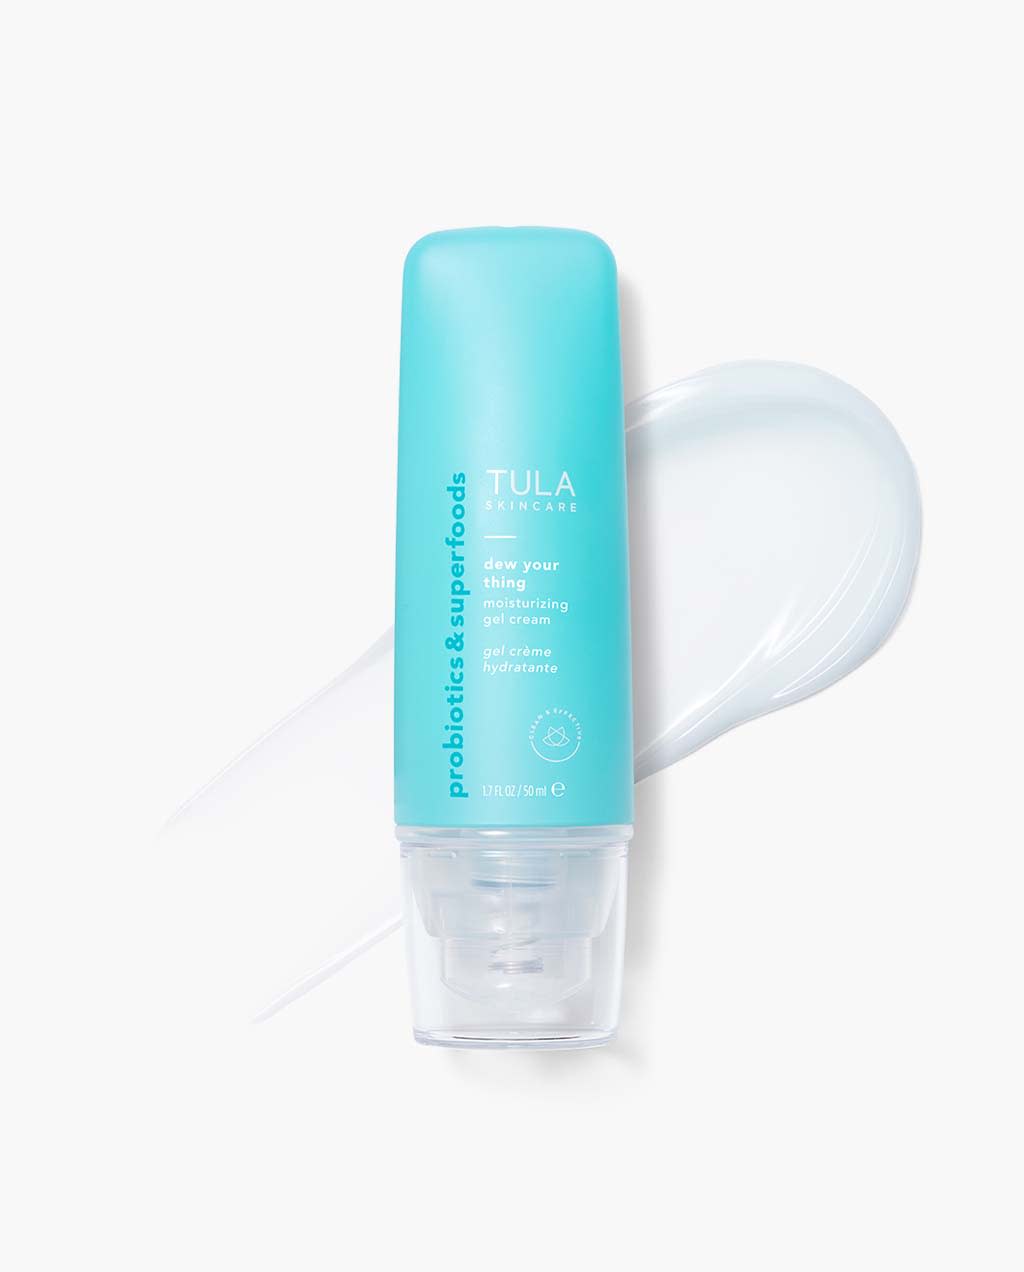 TULA Skin Care Dew Your Thing Moisturizing Gel Cream | Weightless Moisturizer for Face, Lightweight Water-Based Face Cream for Dewy Hydration | 1.7 oz.